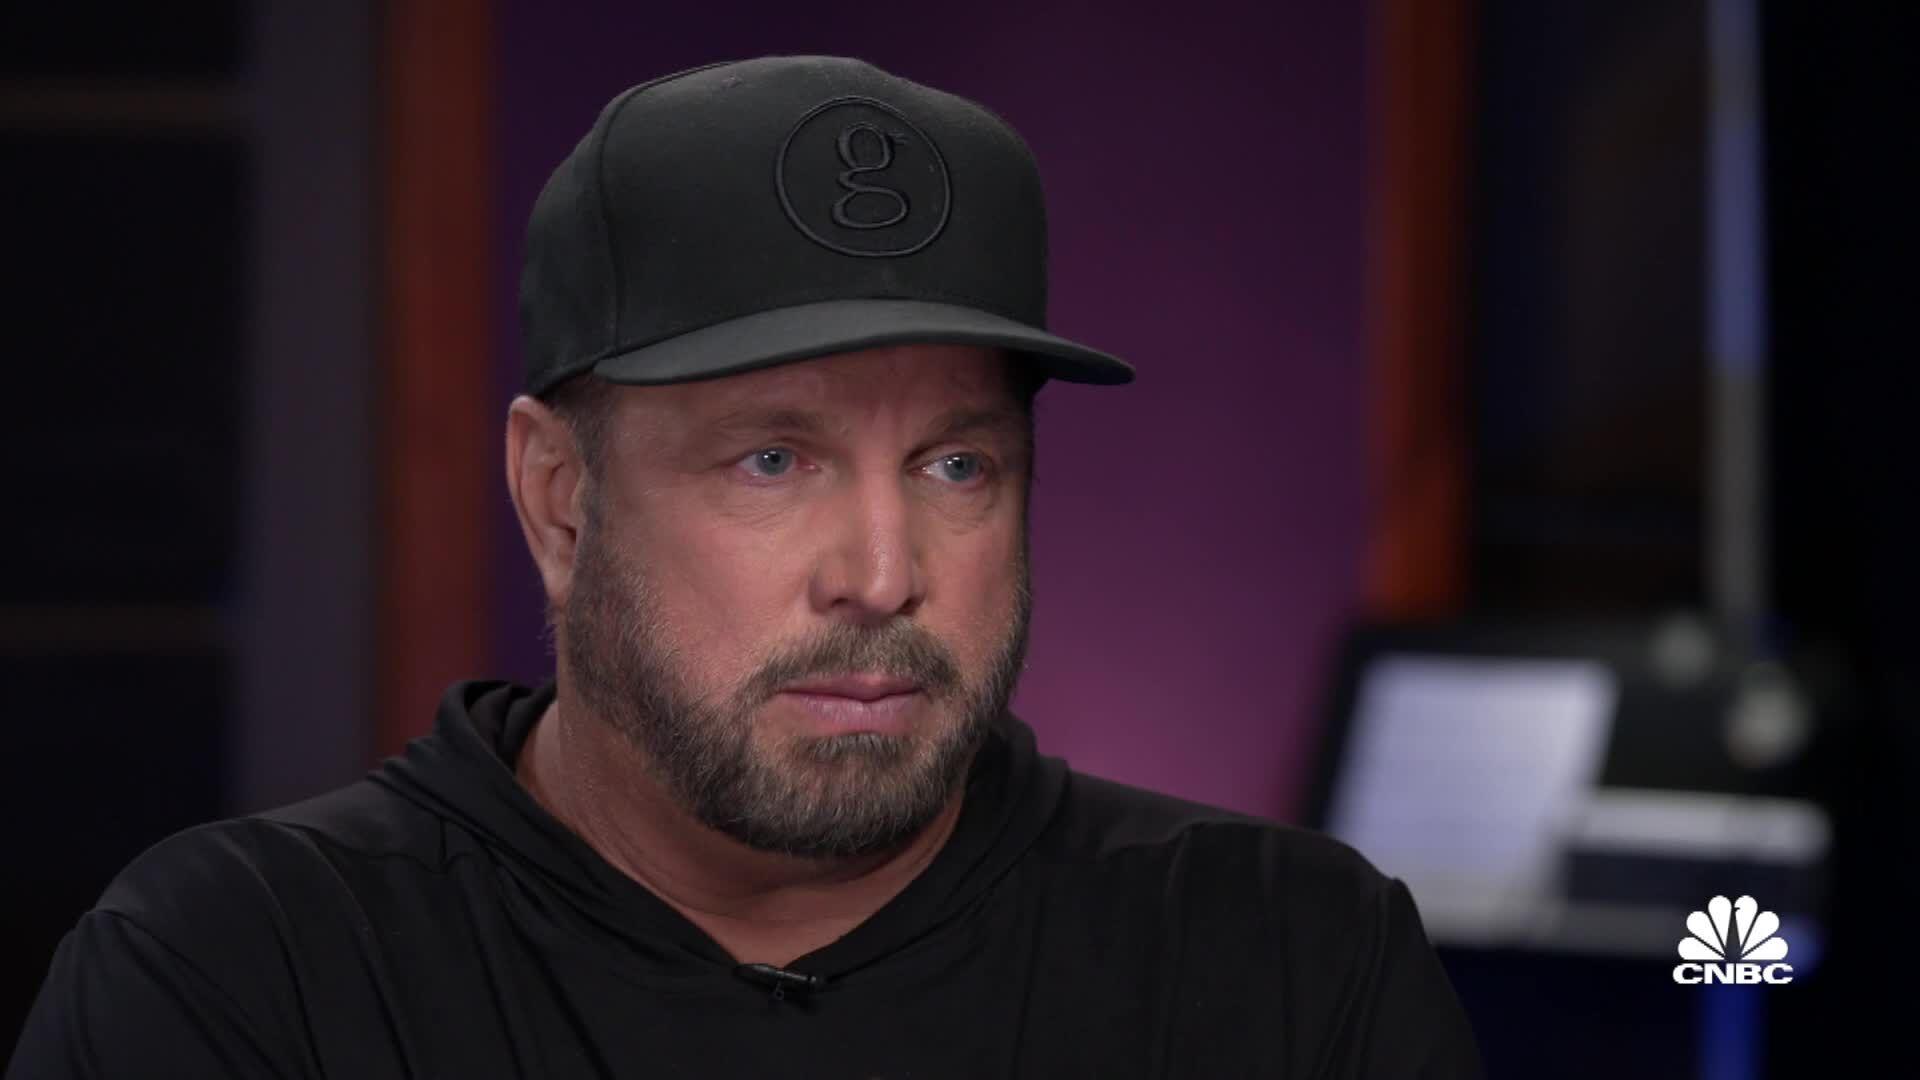 Garth Brooks interviewed for CNBC's 'Cities of Success